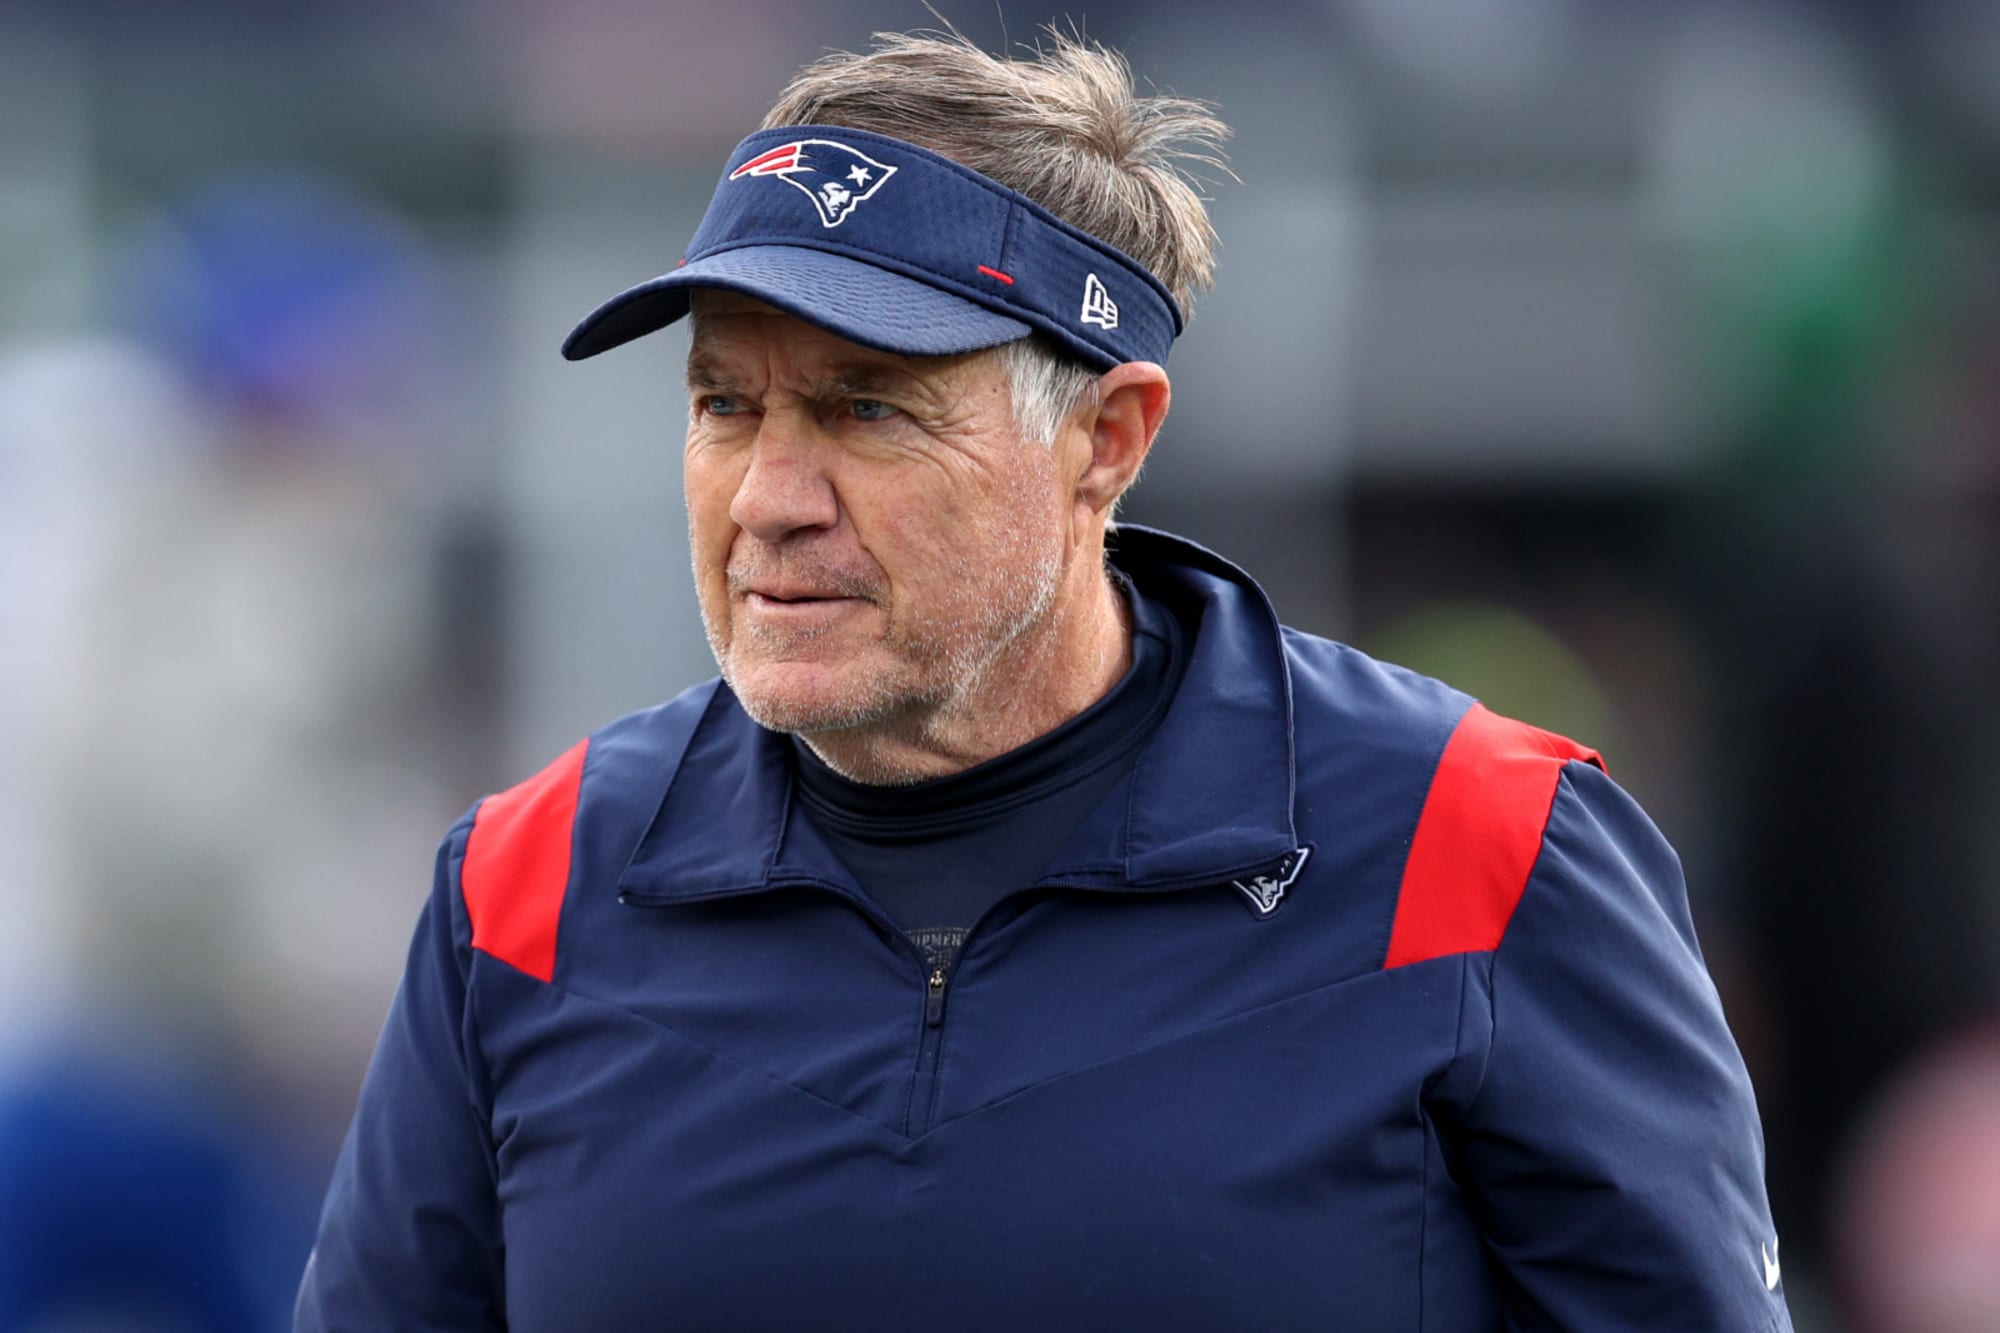 Could Patriots’ HC Bill Belichick retire at the end of the 2022 season?